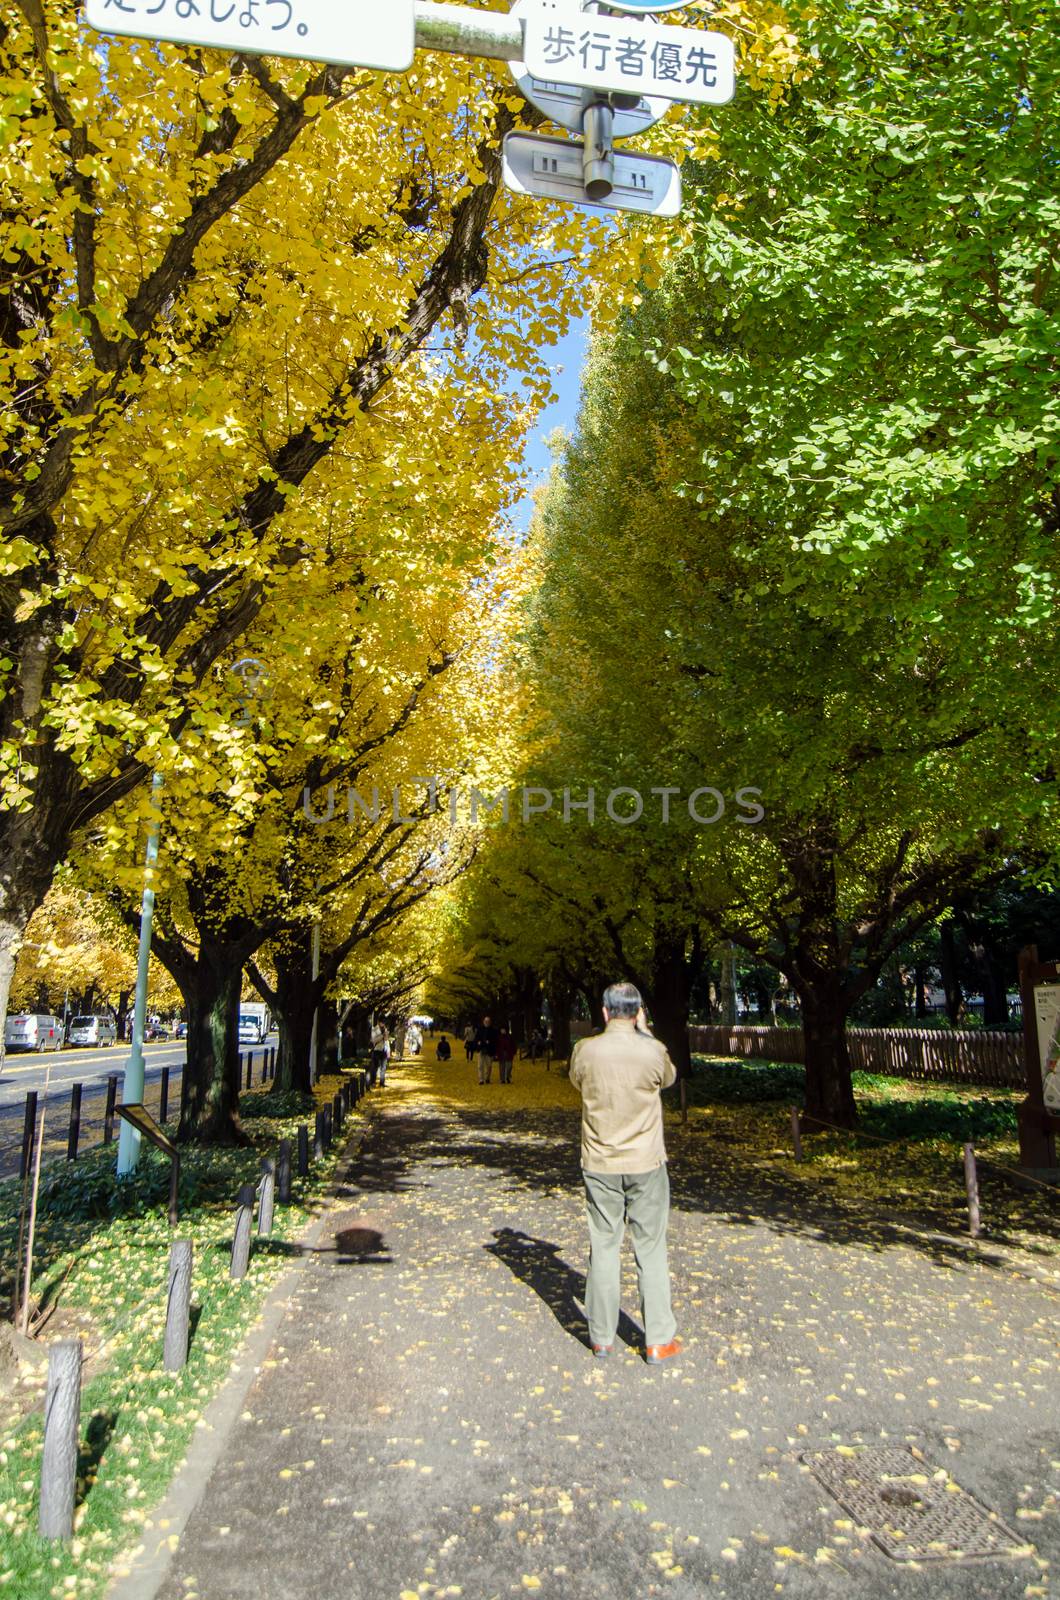 Tokyo, Japan - November 26, 2013: People visit Ginkgo Tree Avenue heading down to the Meiji Memorial Picture Gallery by siraanamwong